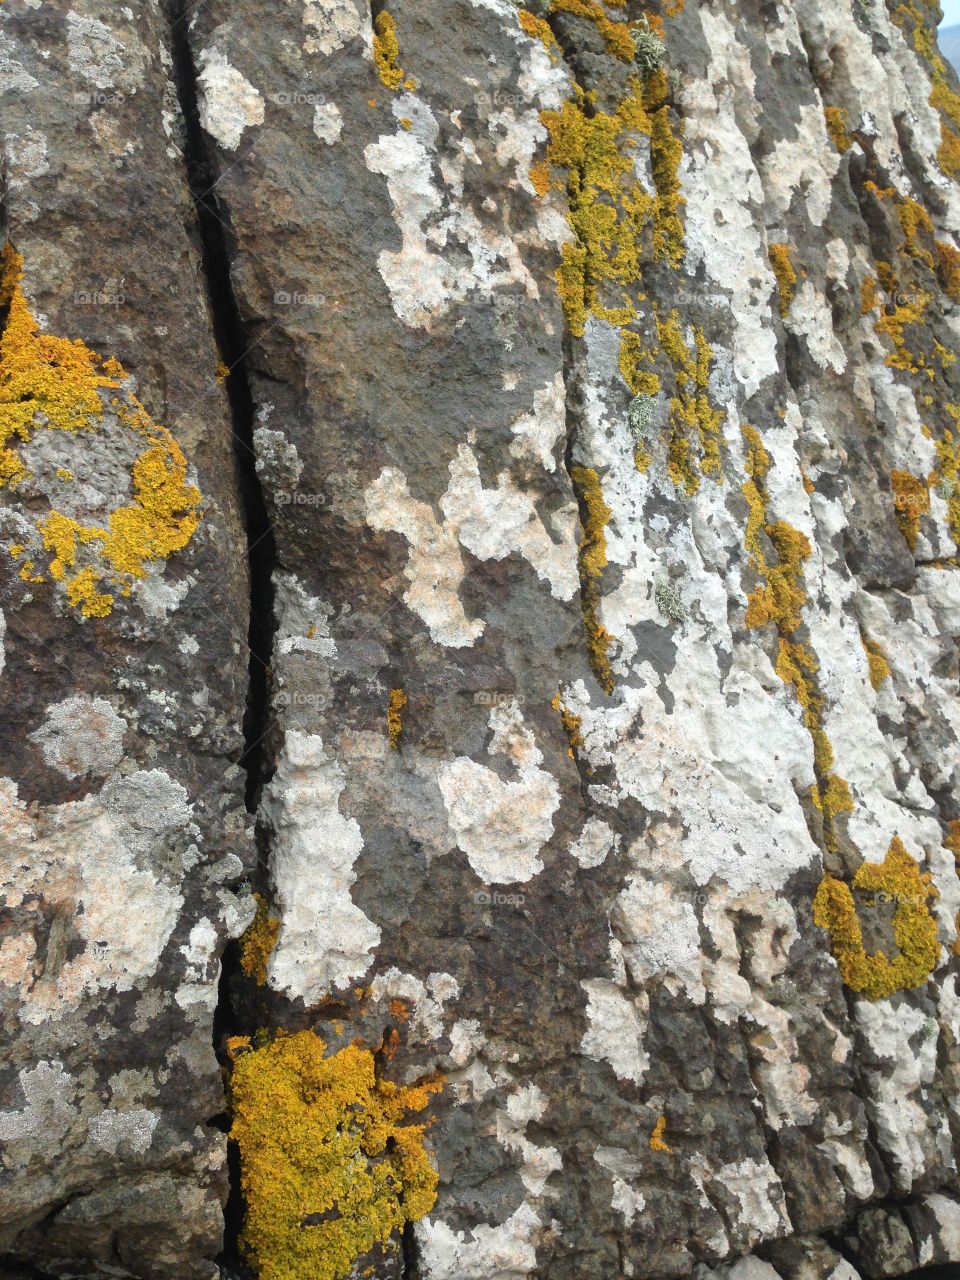 Close up of a rock with yellow and white lichen.